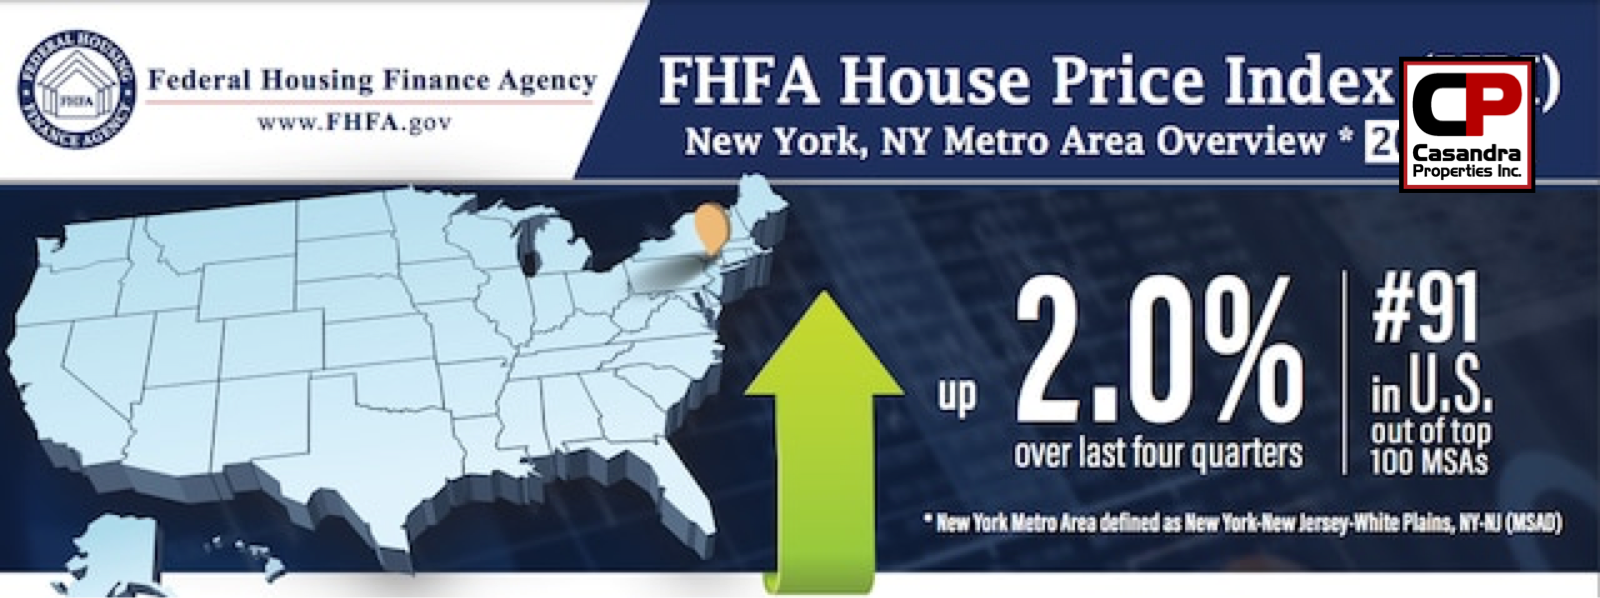 Home Prices on the Rise